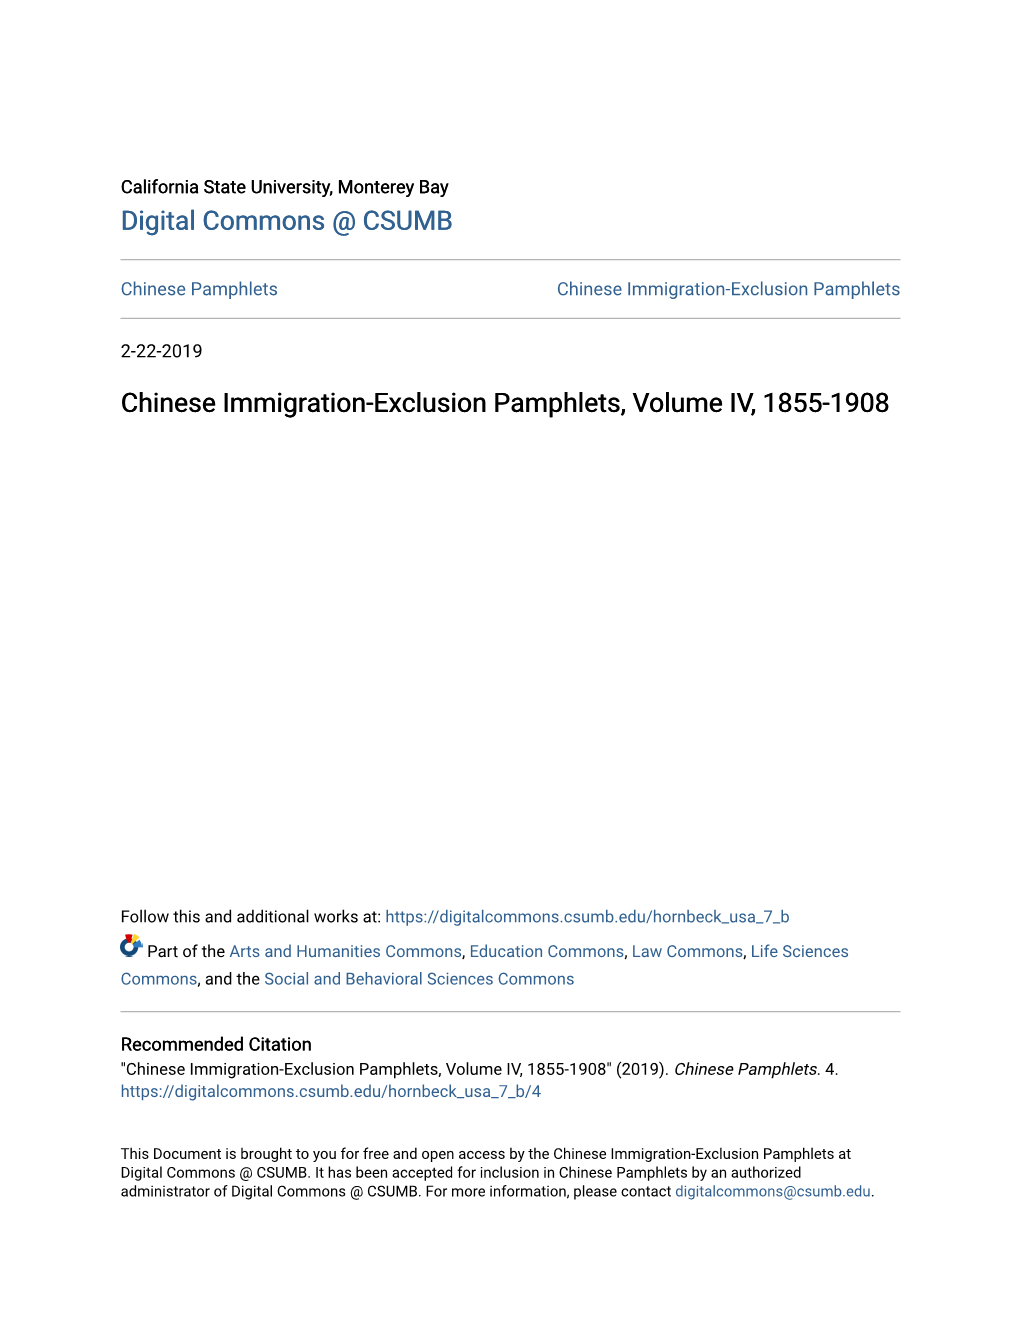 Chinese Immigration-Exclusion Pamphlets, Volume IV, 1855-1908